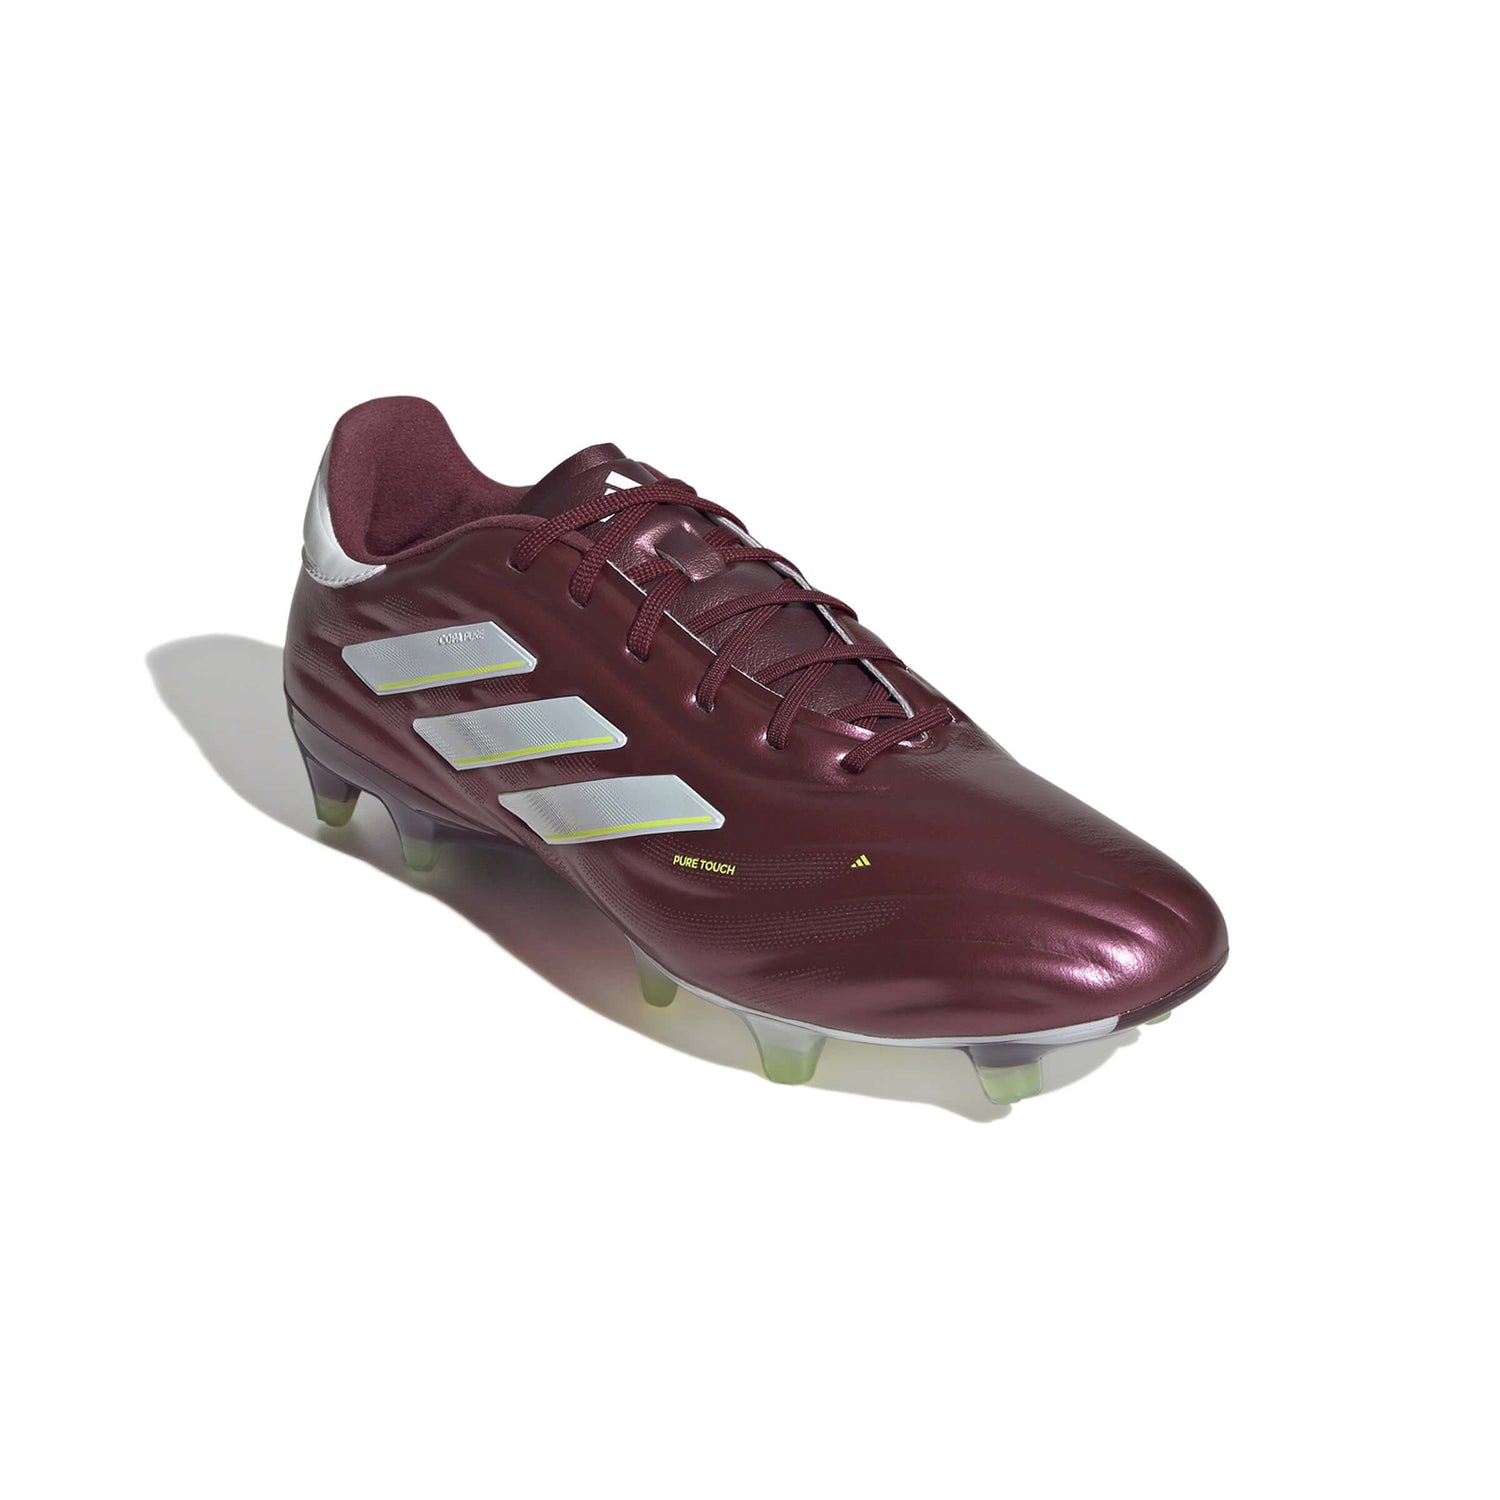 adidas Copa Pure 2 Elite FG - Energy Citrus Pack (SP24) (Lateral - Front)